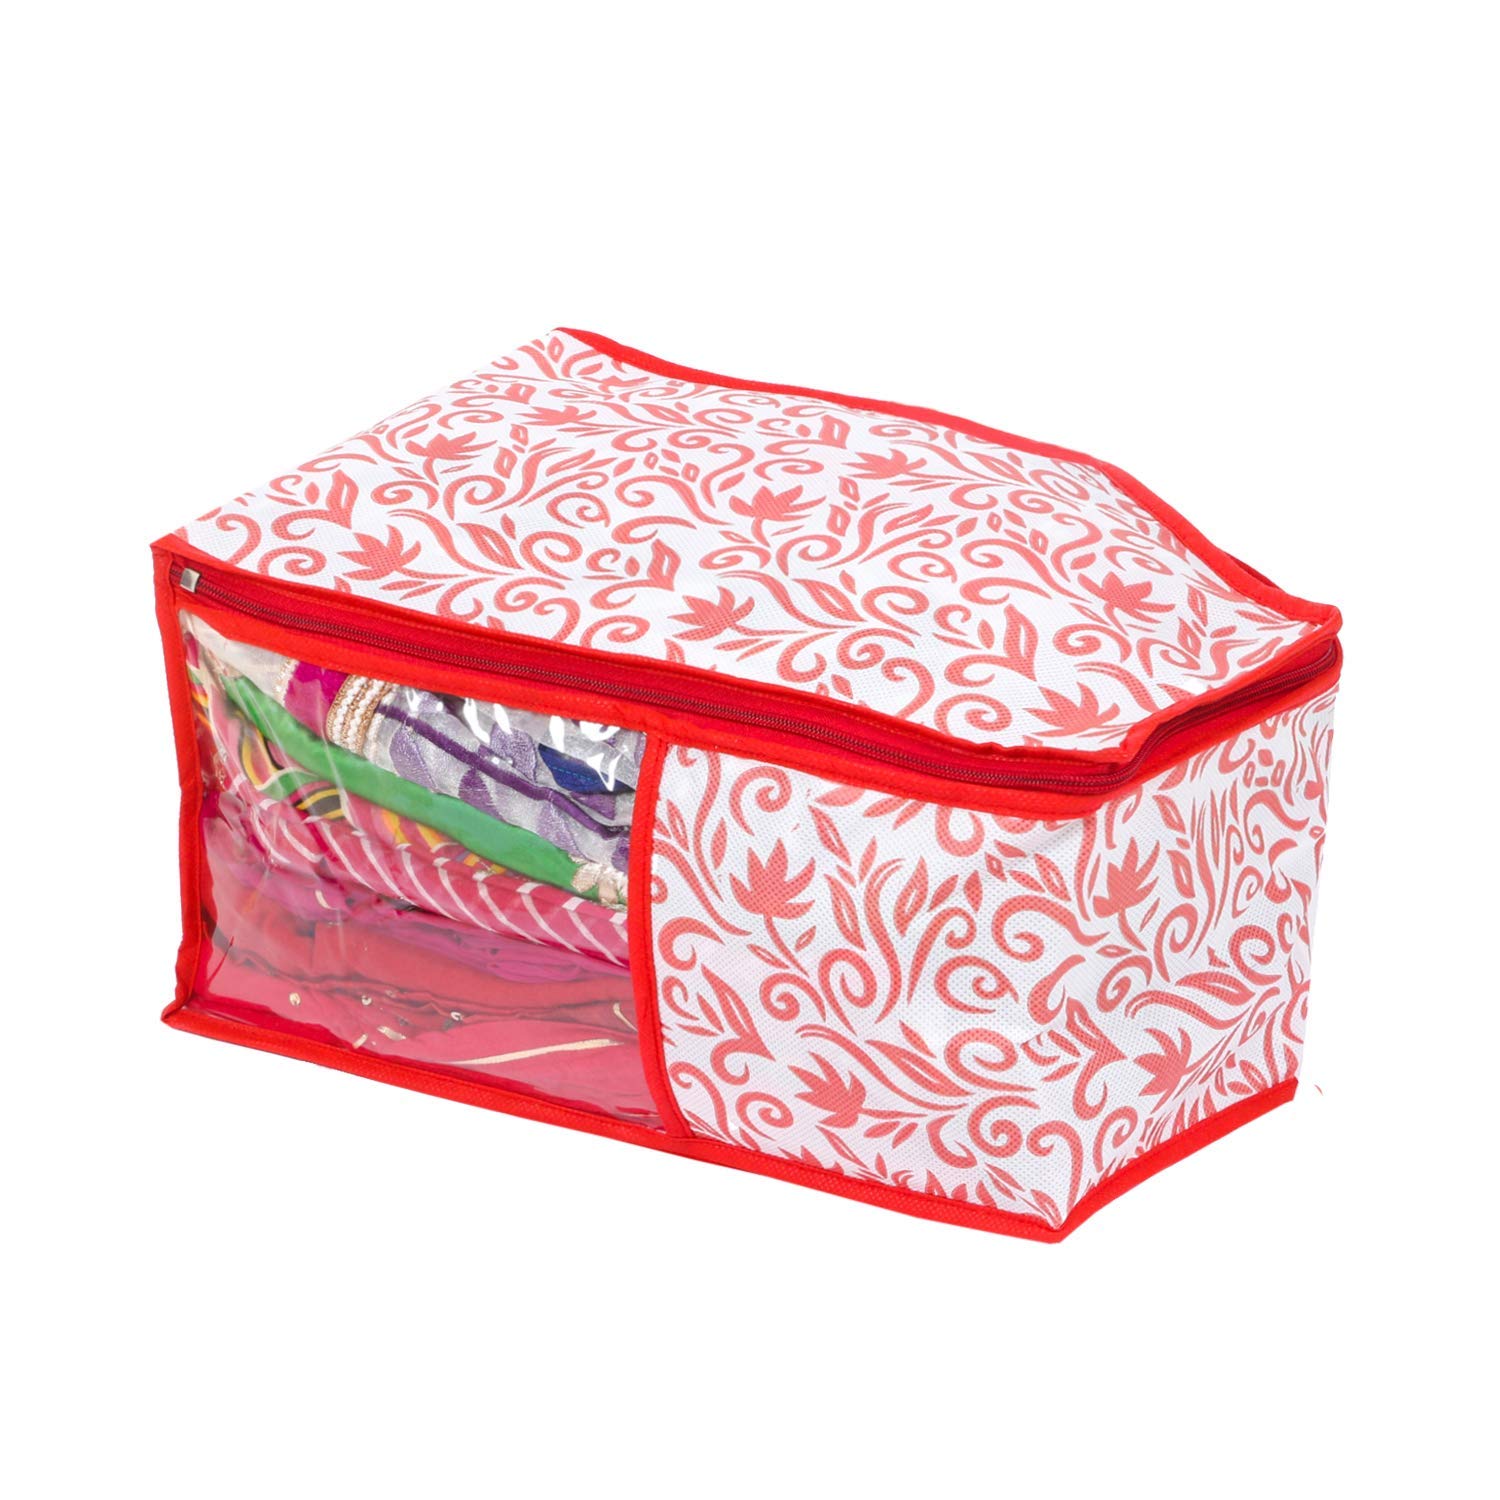 Kuber Industries Leaf Design Non Woven 3 Piece Saree Cover/Cloth Wardrobe Organizer and 3 Pieces Blouse Cover Combo Set (Red) -CTKTC038403